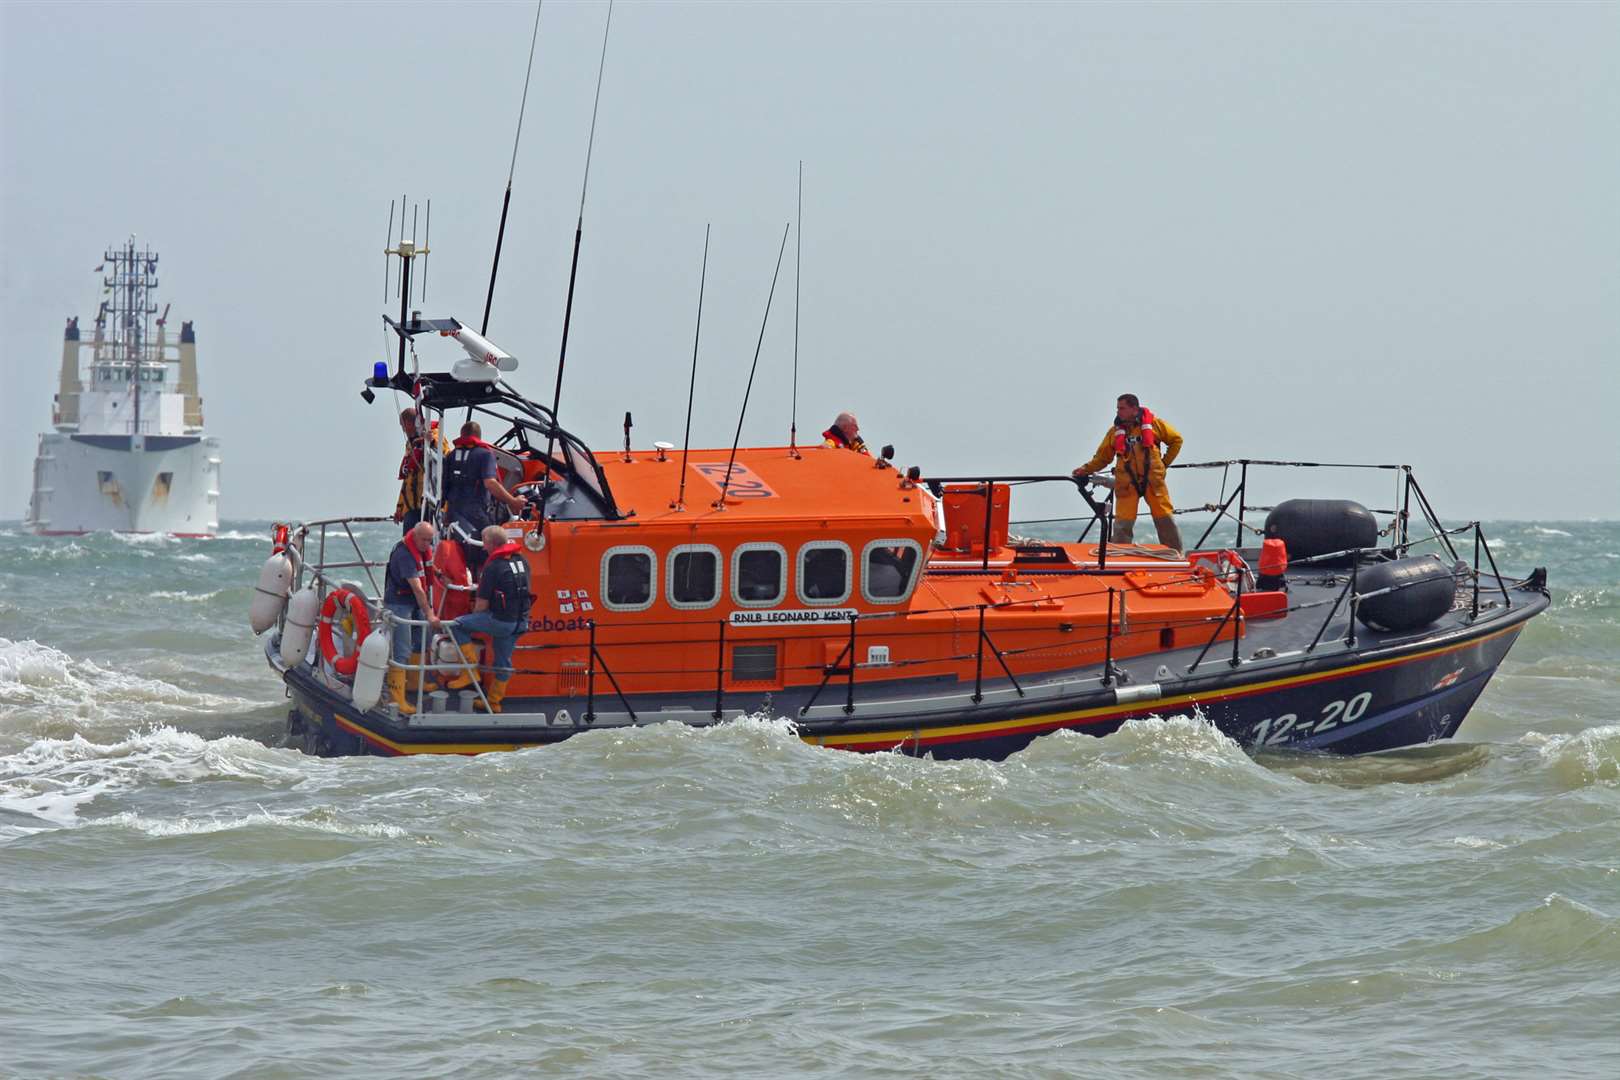 Margate's RNLI all-weather lifeboat Leonard Kent at sea